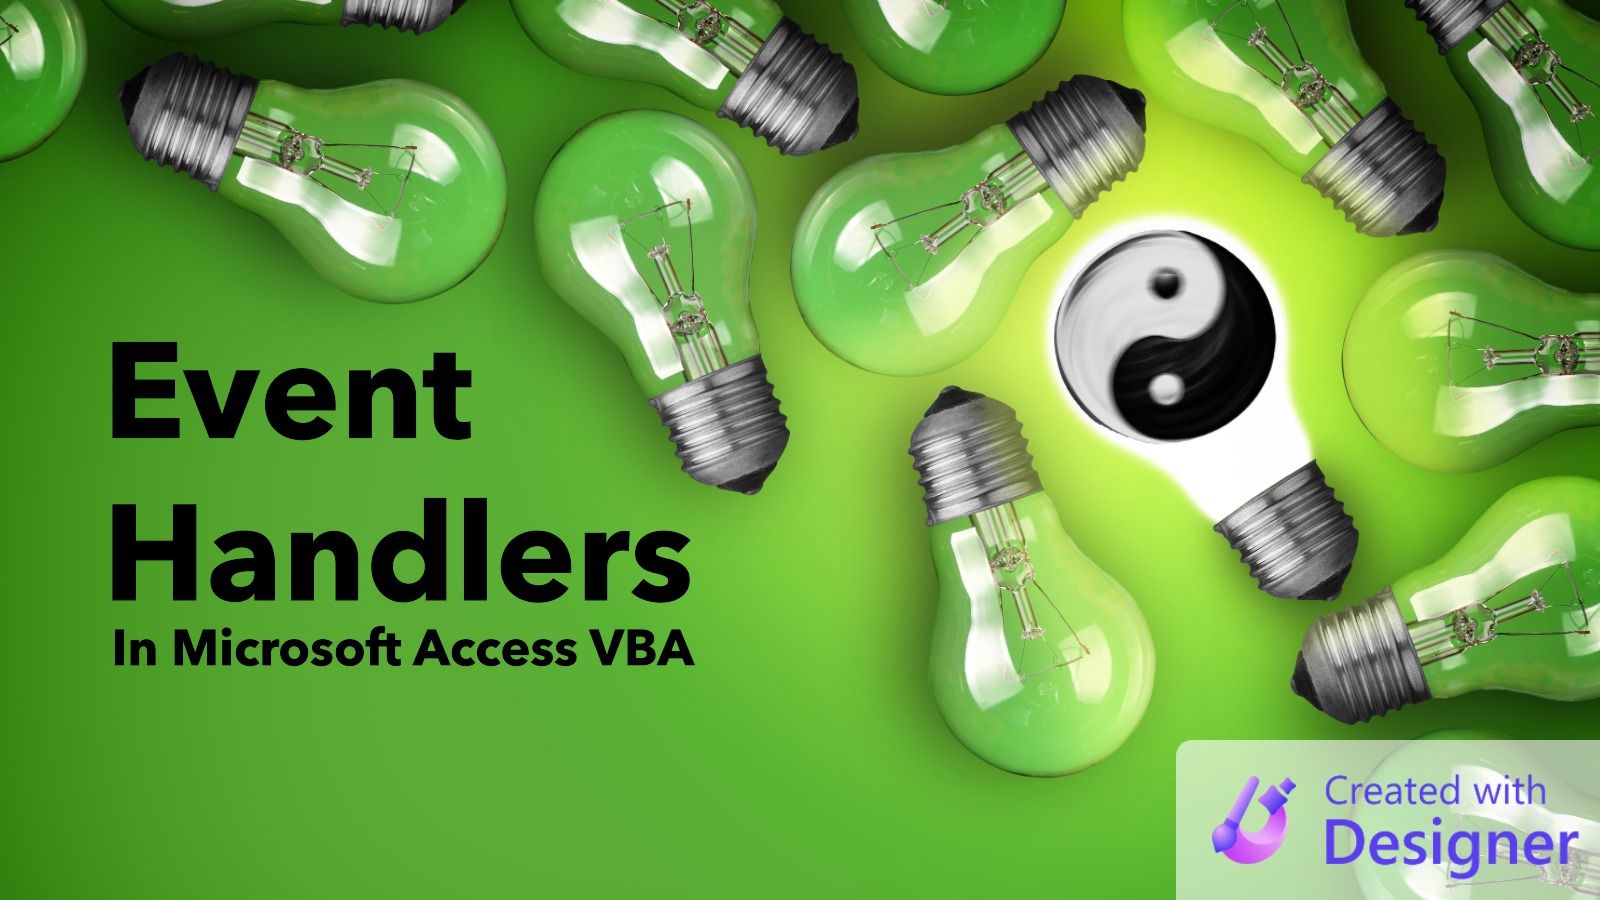 Event Handlers in Microsoft Access VBA